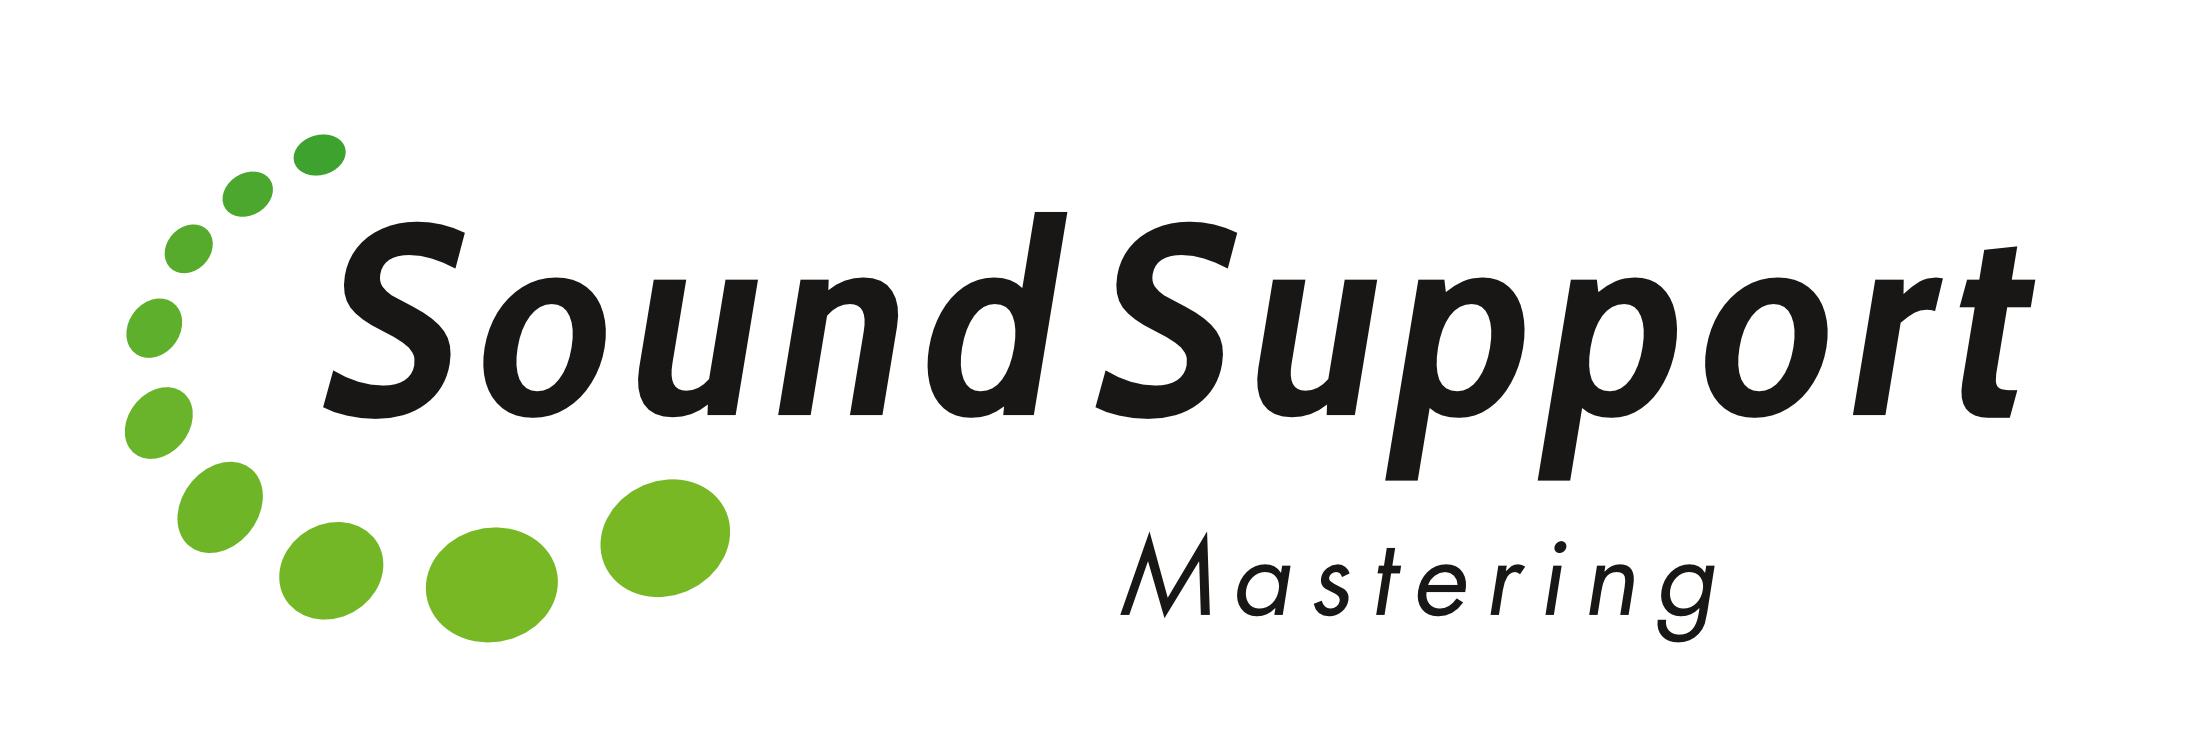 Soundsupport Mastering